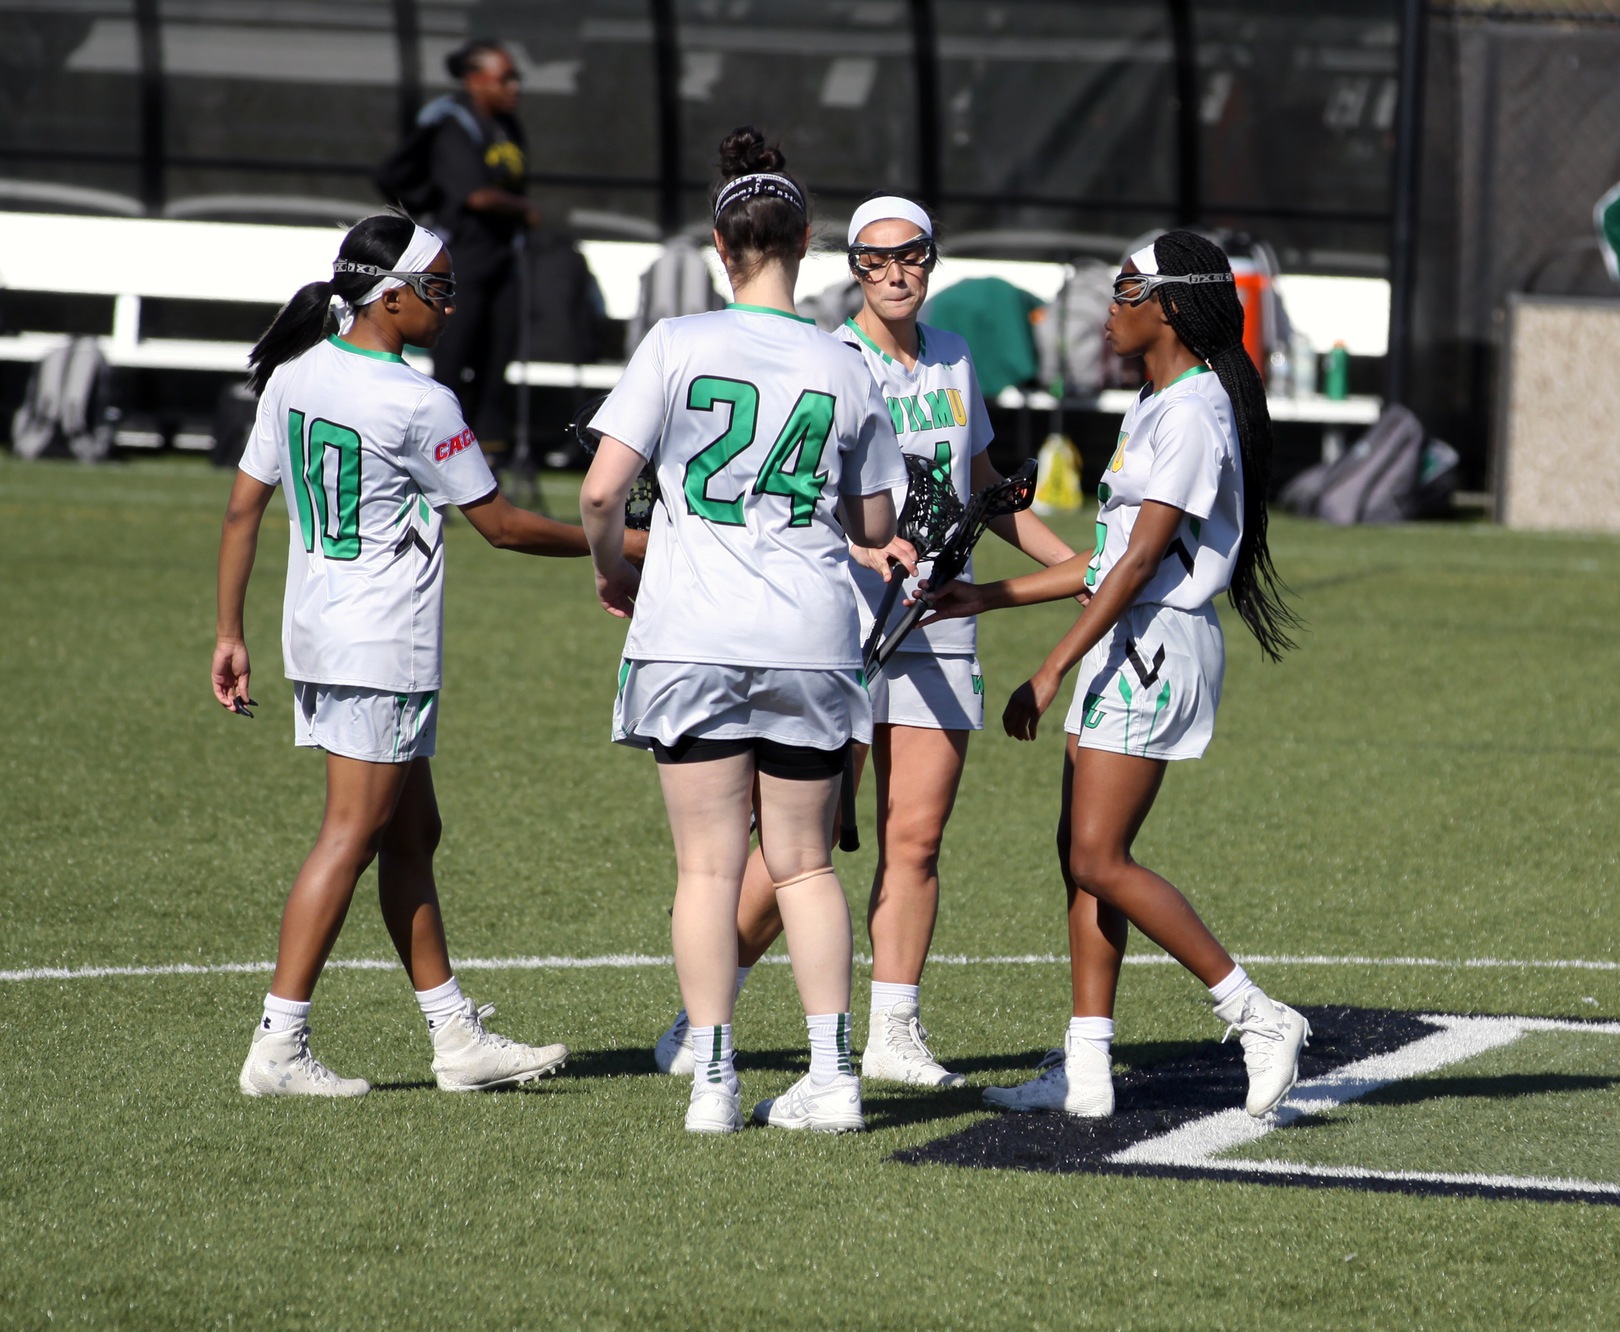 Copyright 2019; Wilmington University. All rights reserved. Photo by Katlynne Tubo. April 3, 2019 vs. Felician.